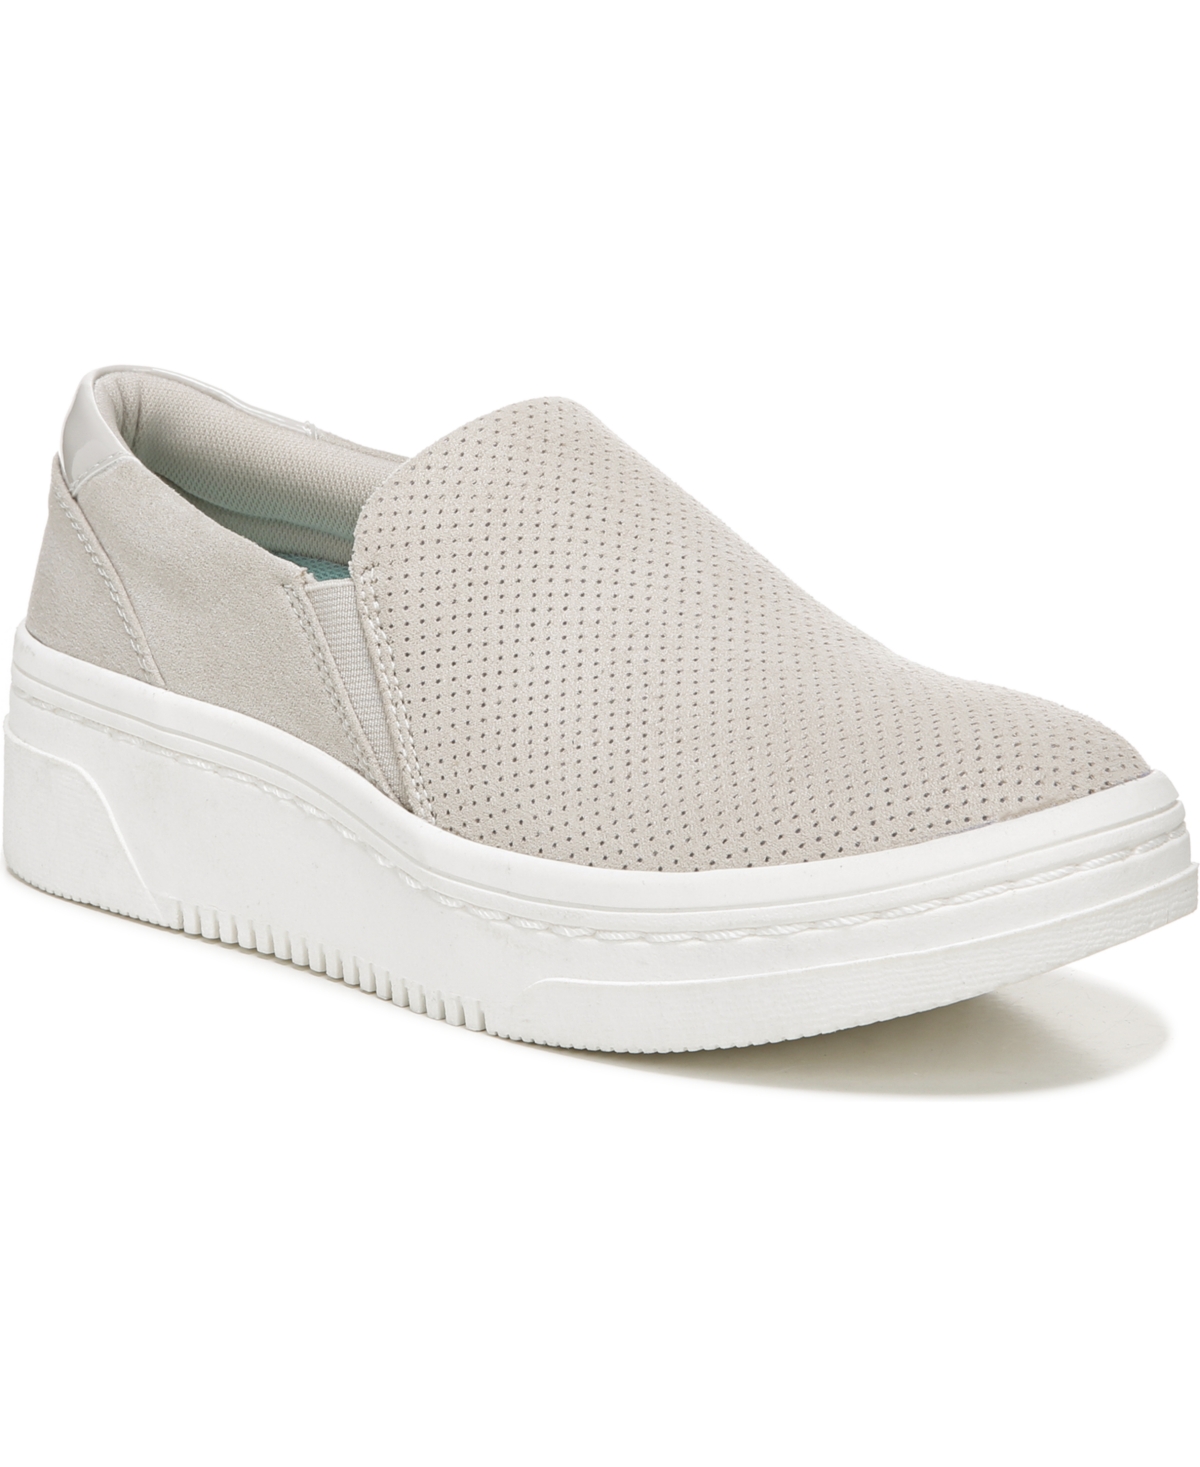 Women's Madison-Next Slip-On Sneakers - Oyster Fabric